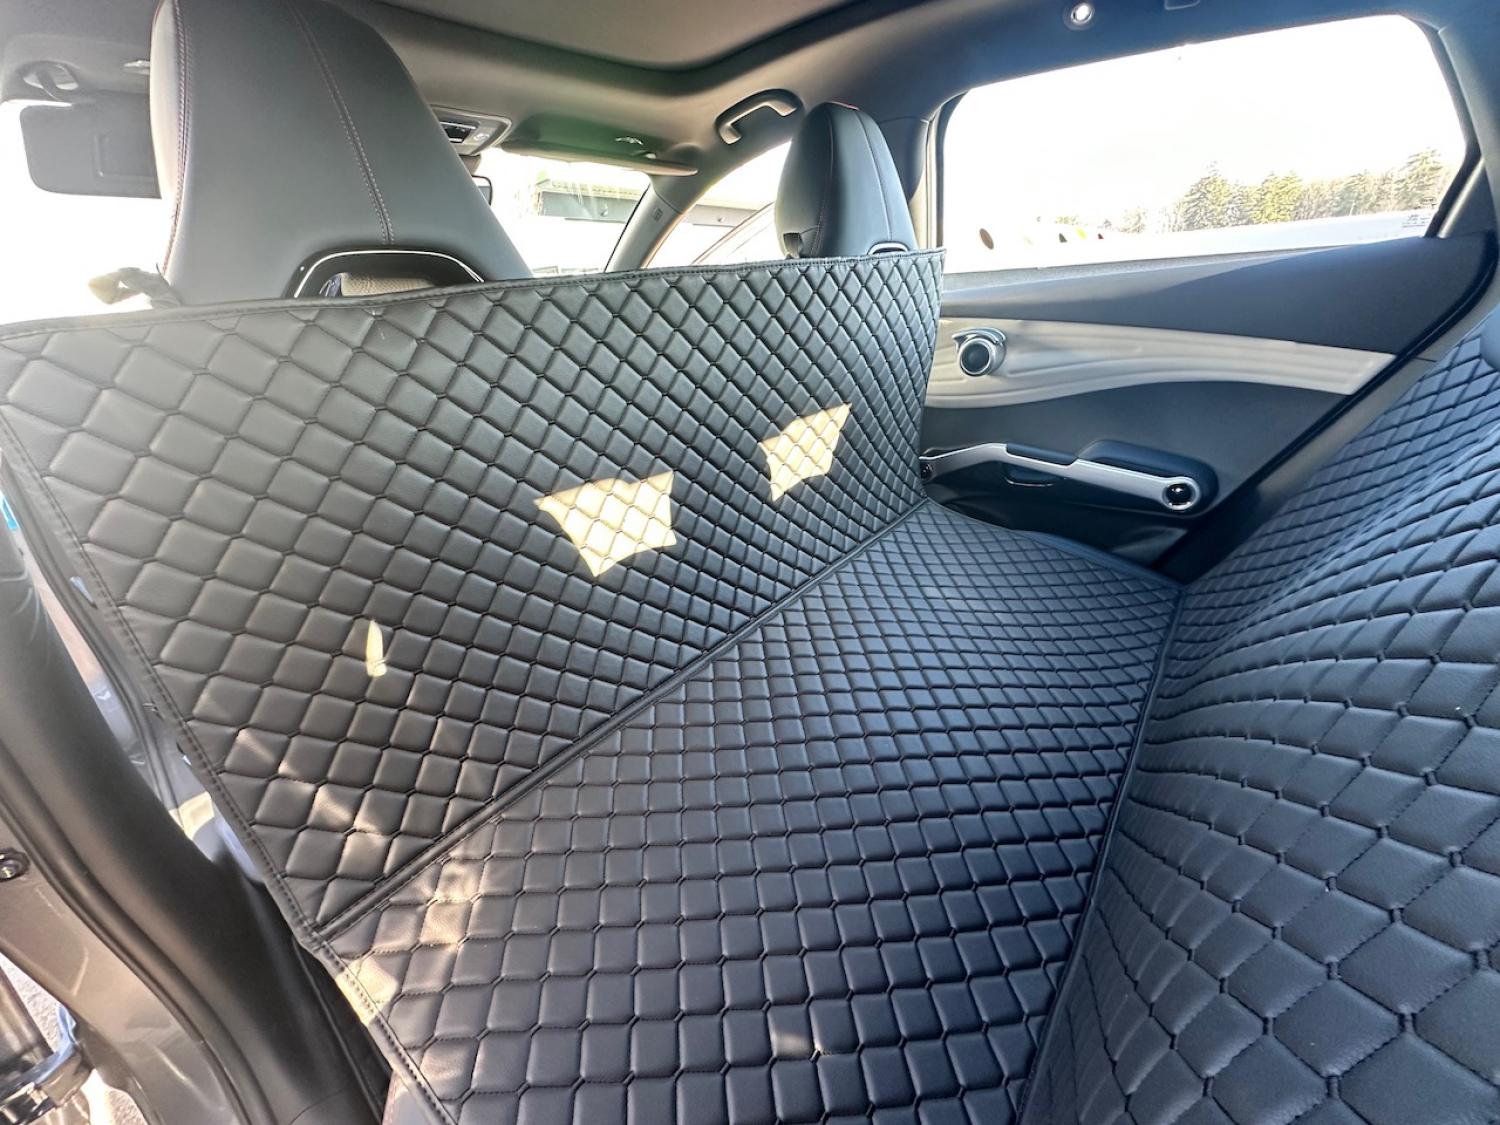 CARSTYLER® Back Seat Cover Geeignet Für Ford Kuga 20, 2019-heute